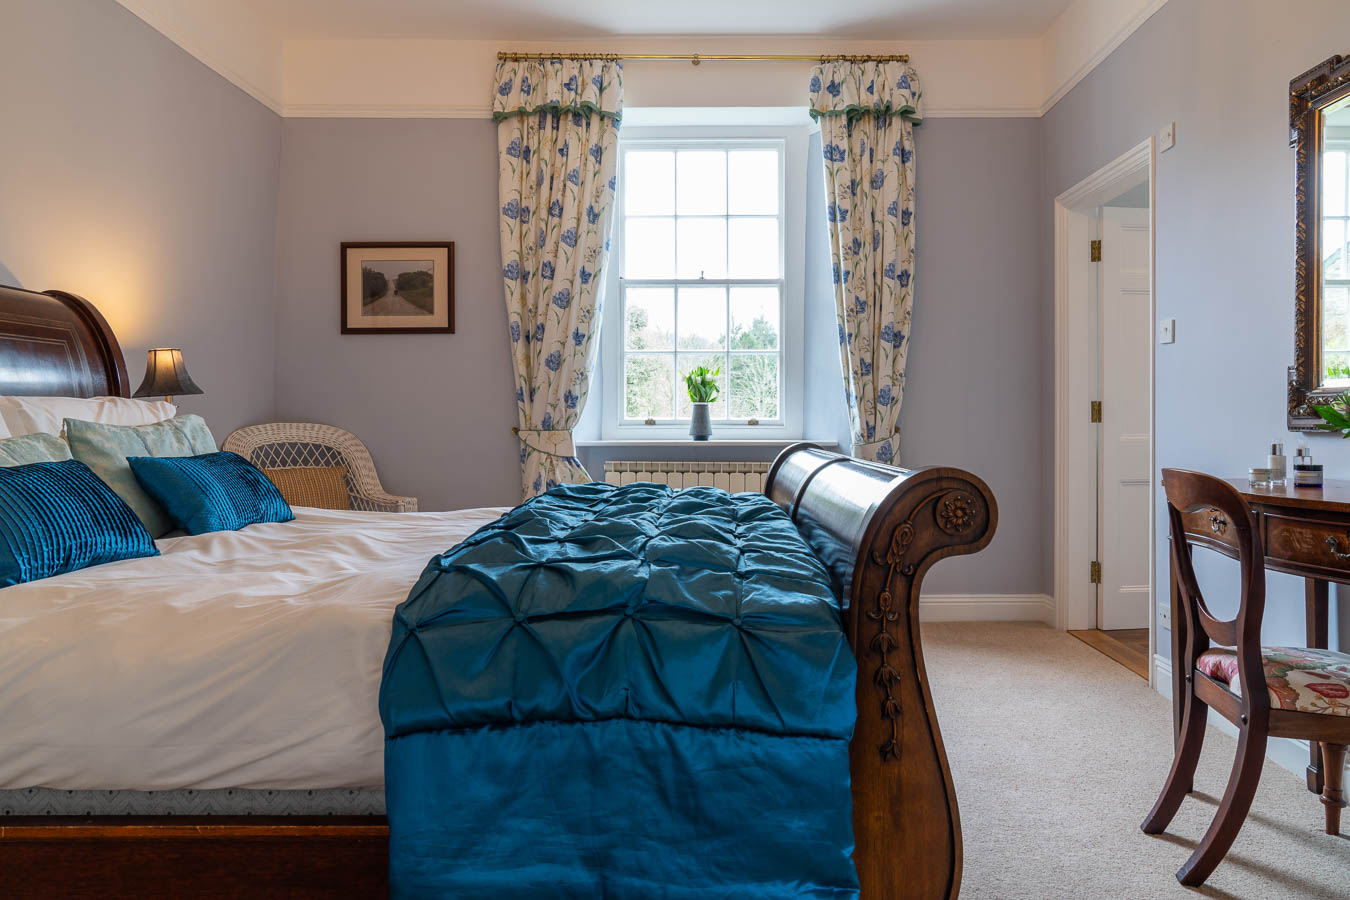 The Blue bedroom in Flear House with king size sleigh bed with matching dresser and bedsides and large sash window overlooking the front garden.